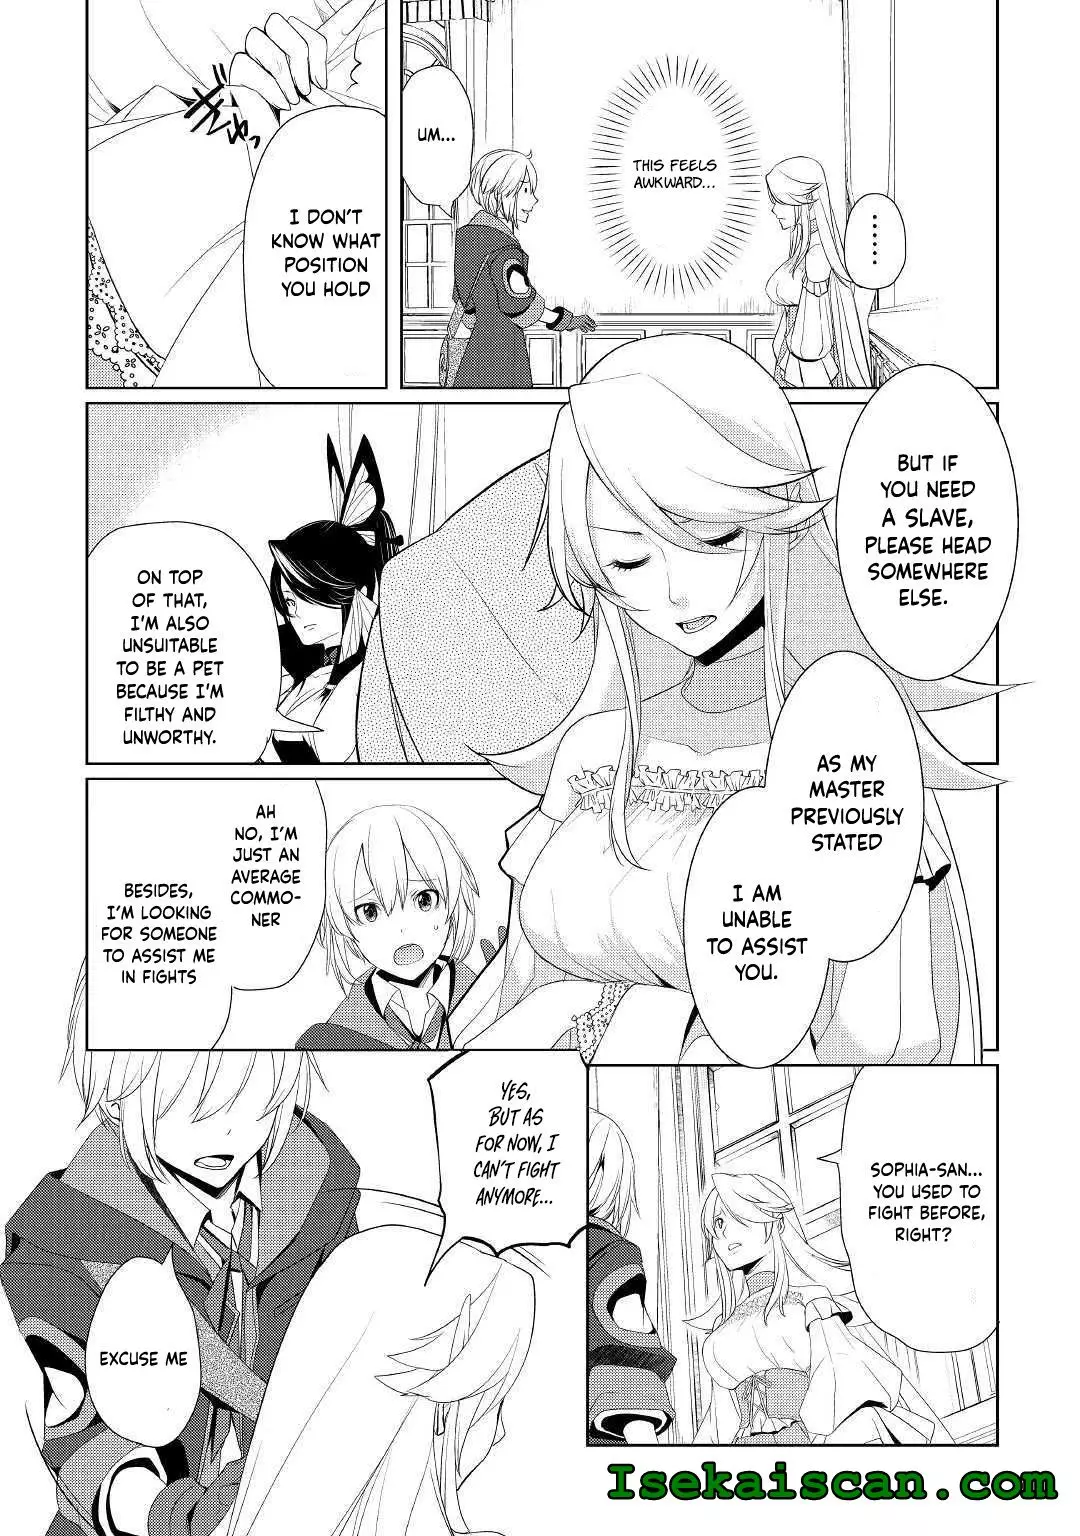 Someday Will I Be The Greatest Alchemist? - 13 page 6-8449b98a